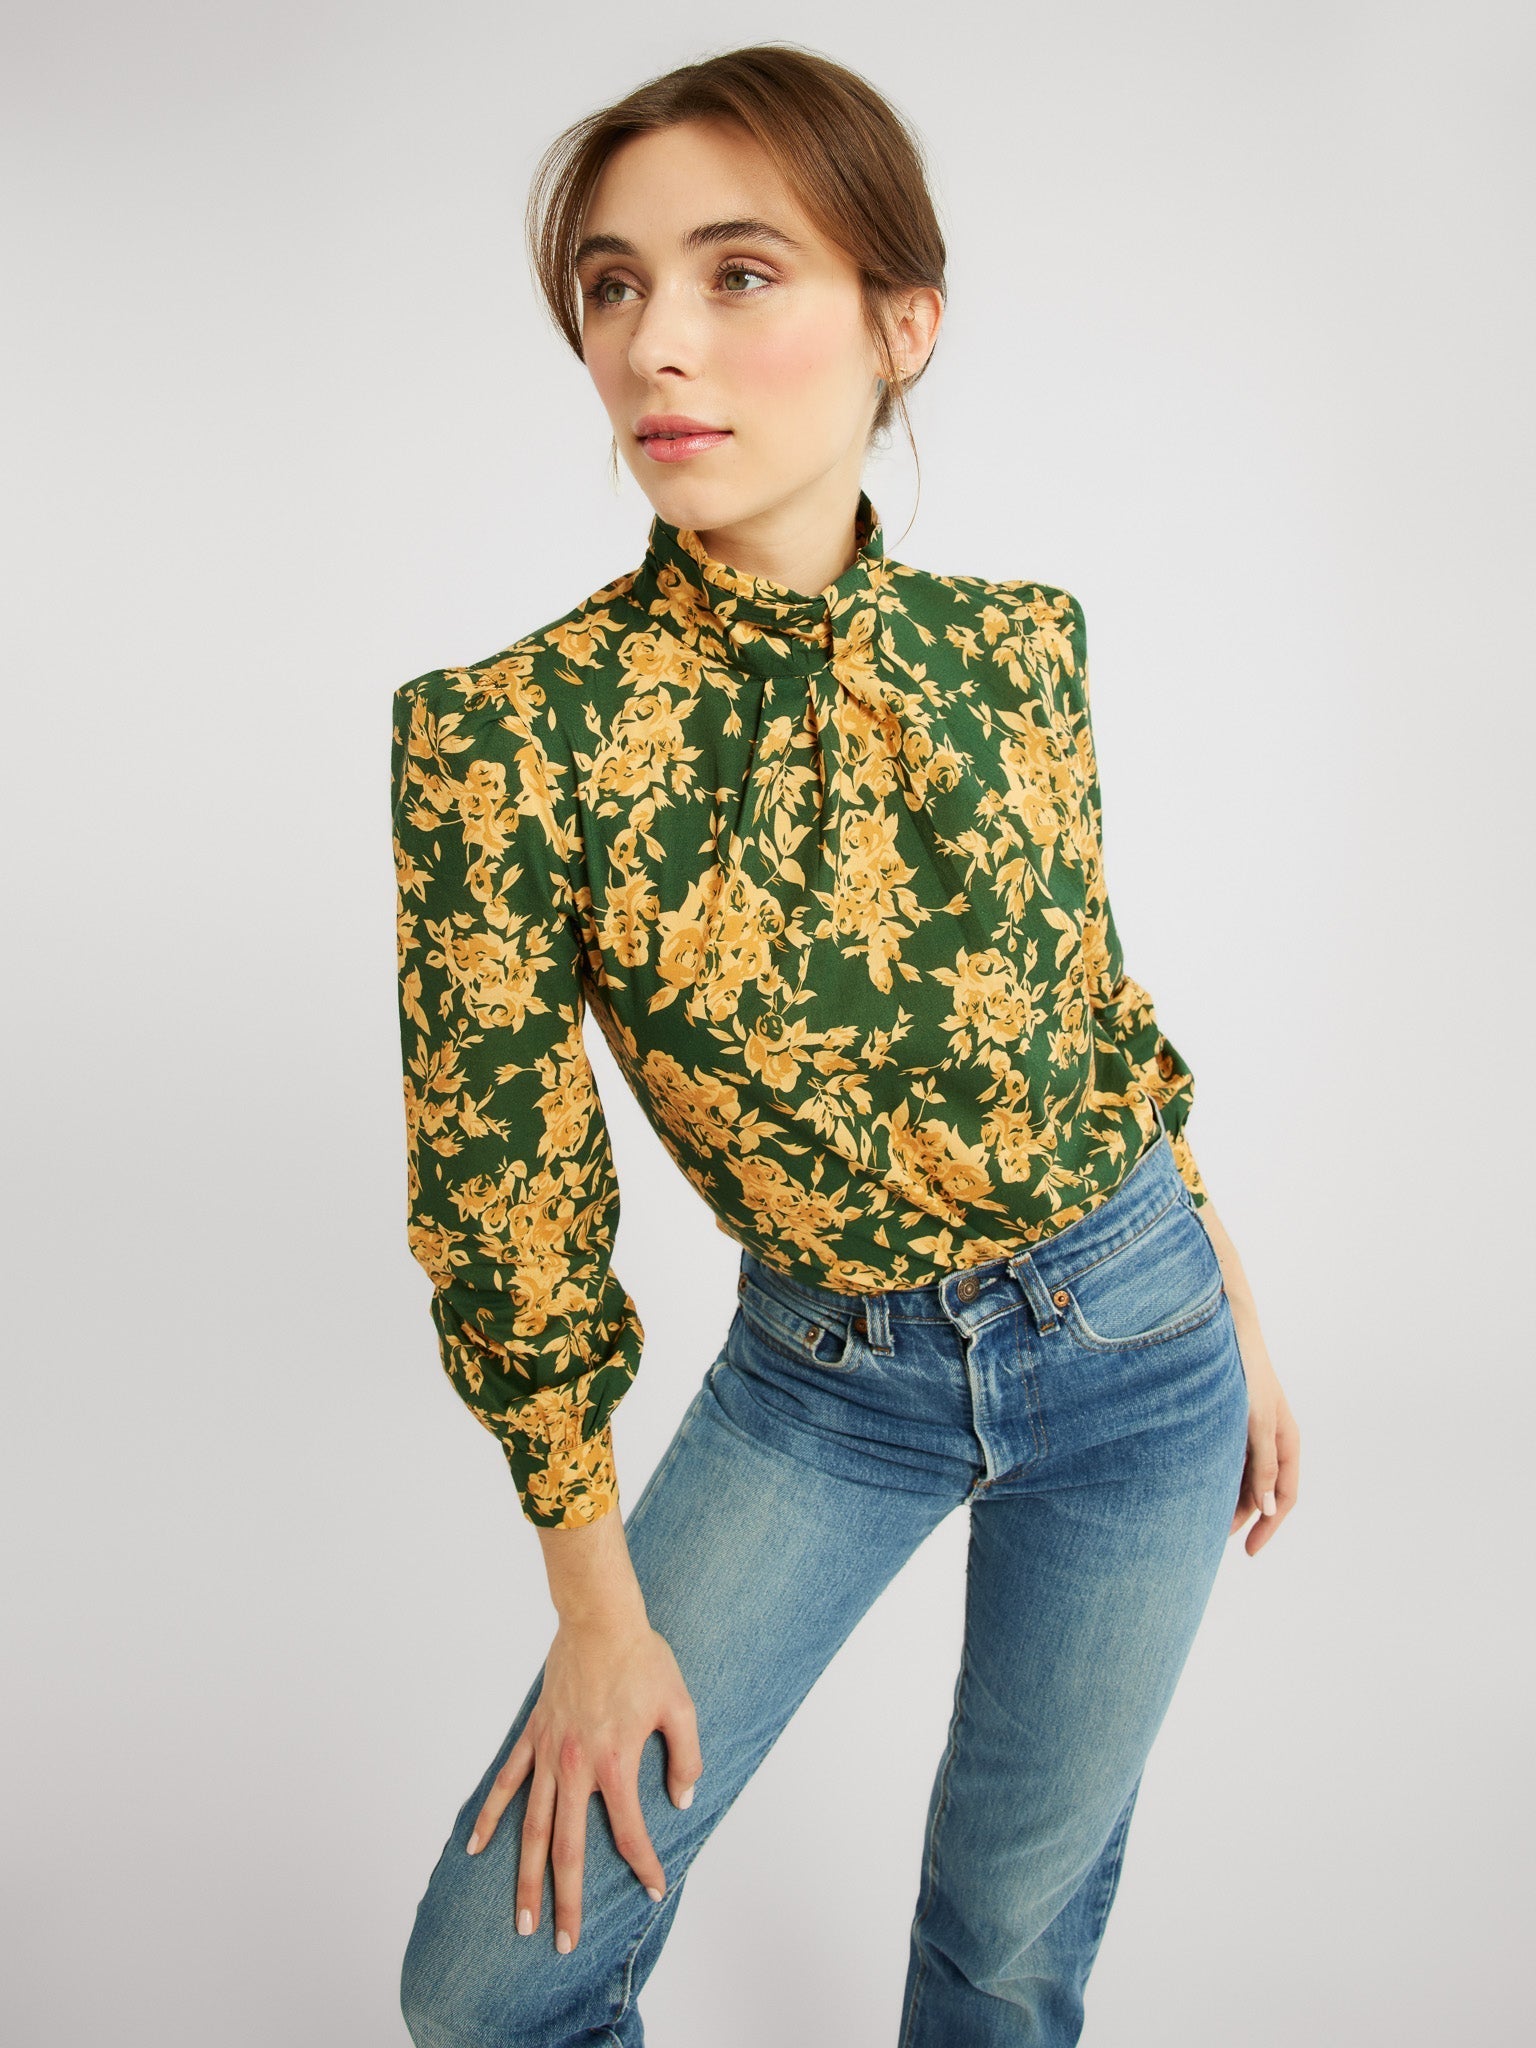 MILLE Clothing Charlotte Top in Emerald Bouquet